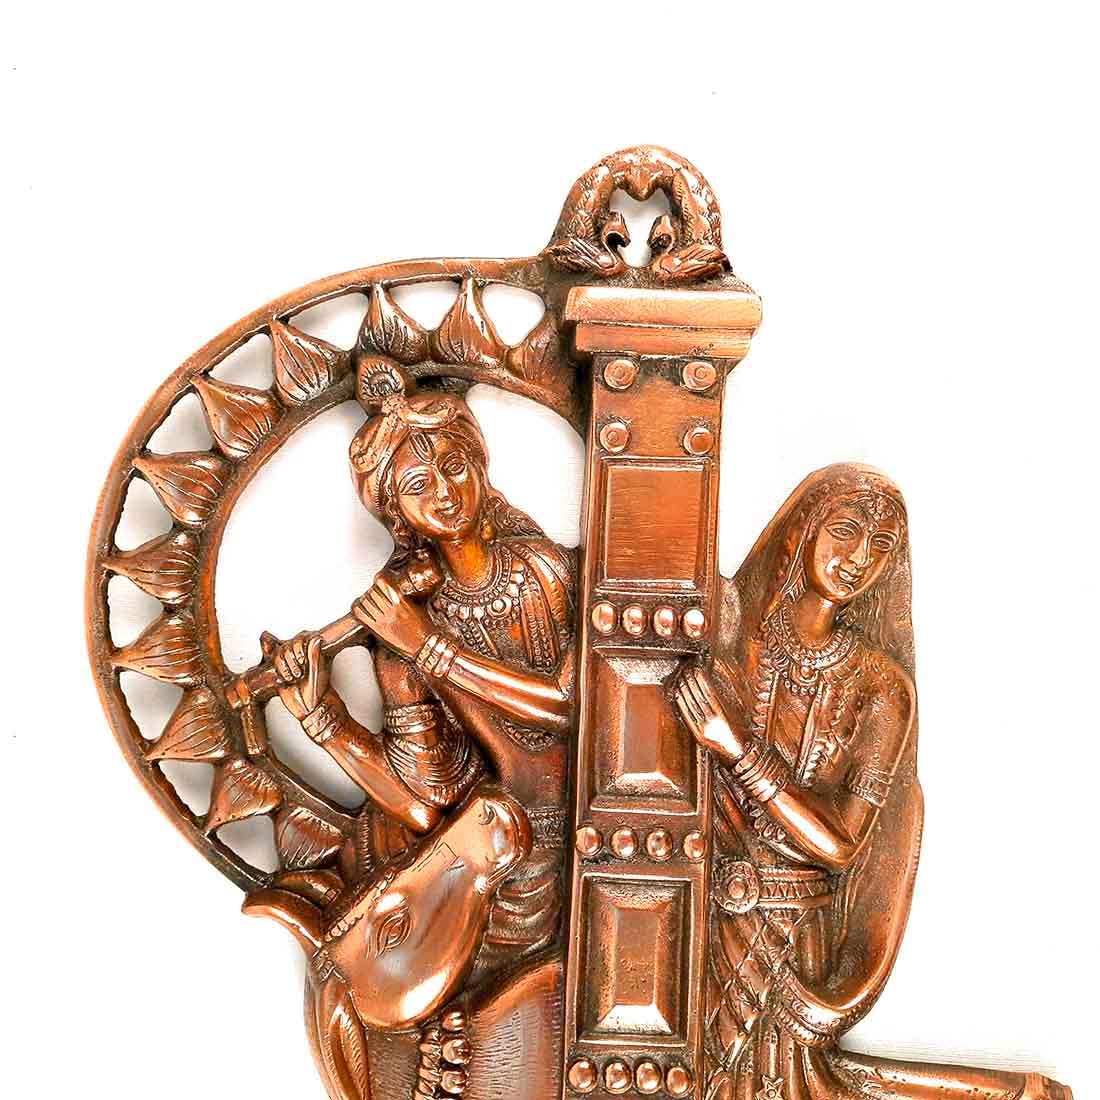 Radha Krishna Wall Hanging Idol | Shri Radha Krishna Playing Flute With Cow Wall Hanging Art Statue Murti | Religious & Spiritual Sculpture - for Gift, Home, Living Room, Office, Puja Room Decoration  - 21 Inch